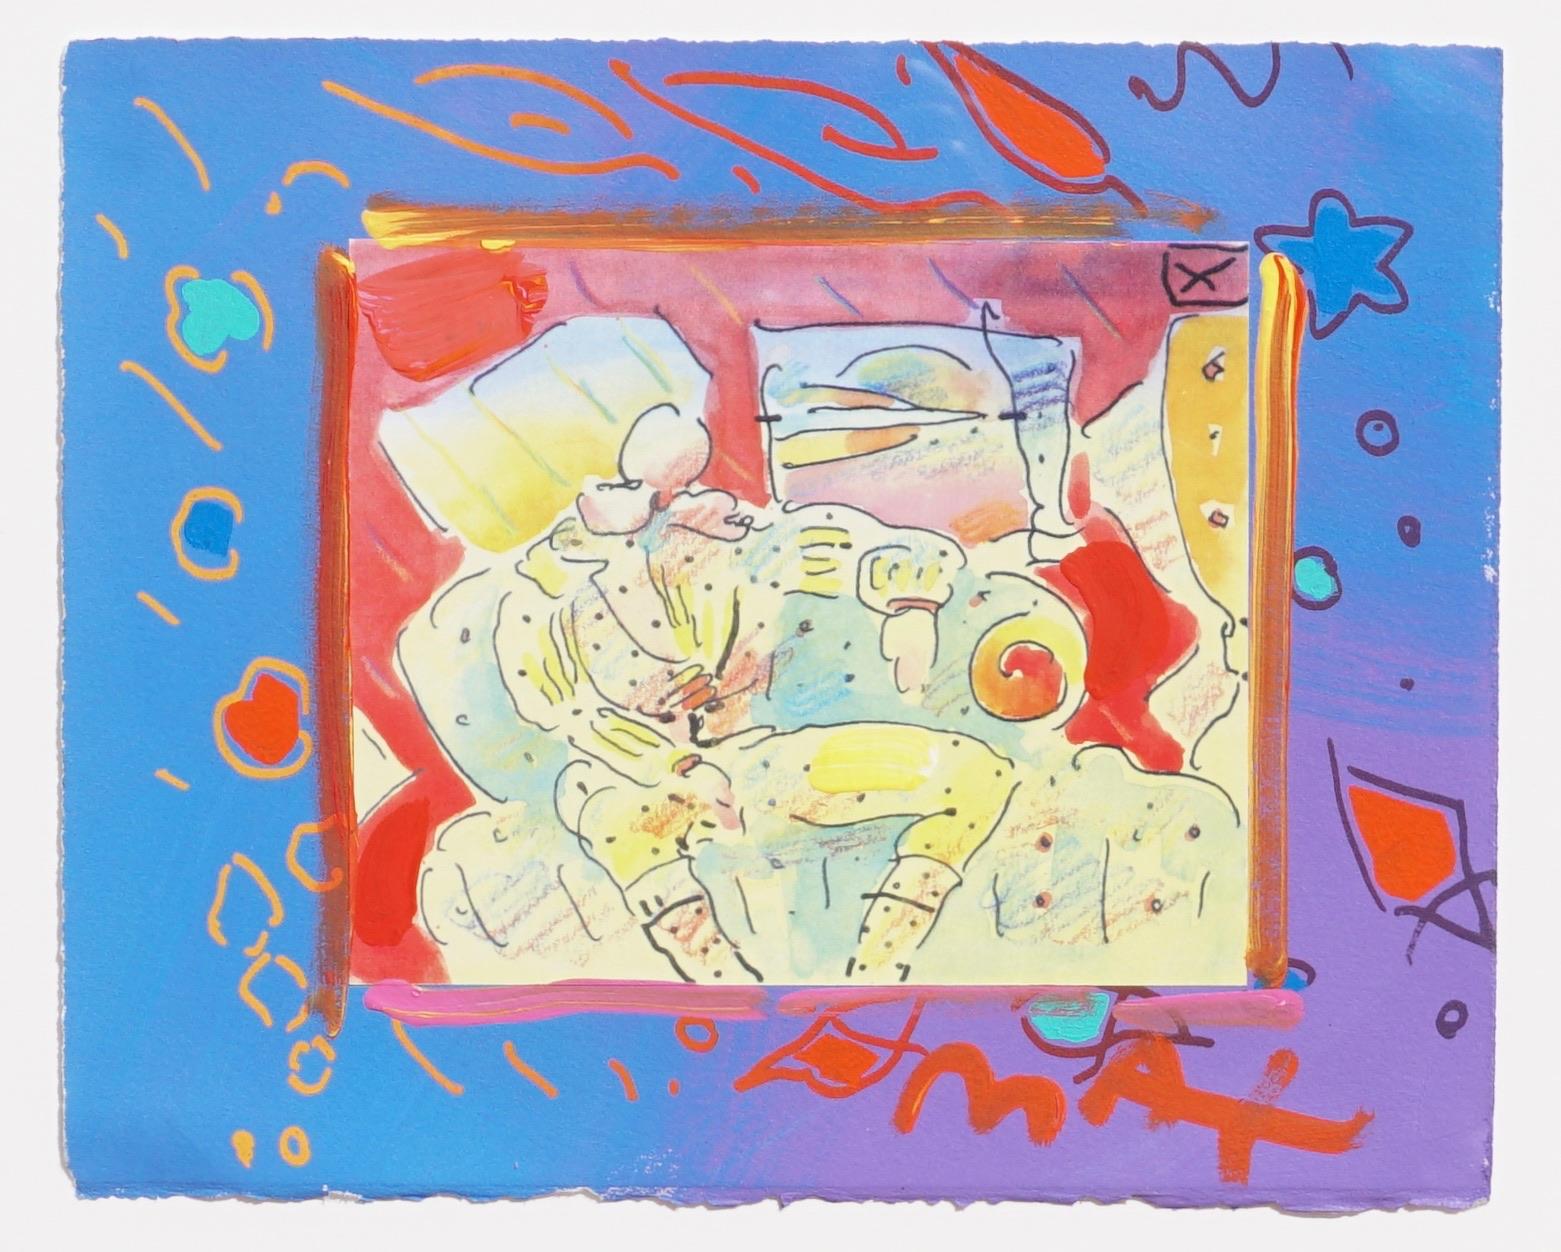 American Peter Max Mixed-Media Enamel on Lithograph, 1996